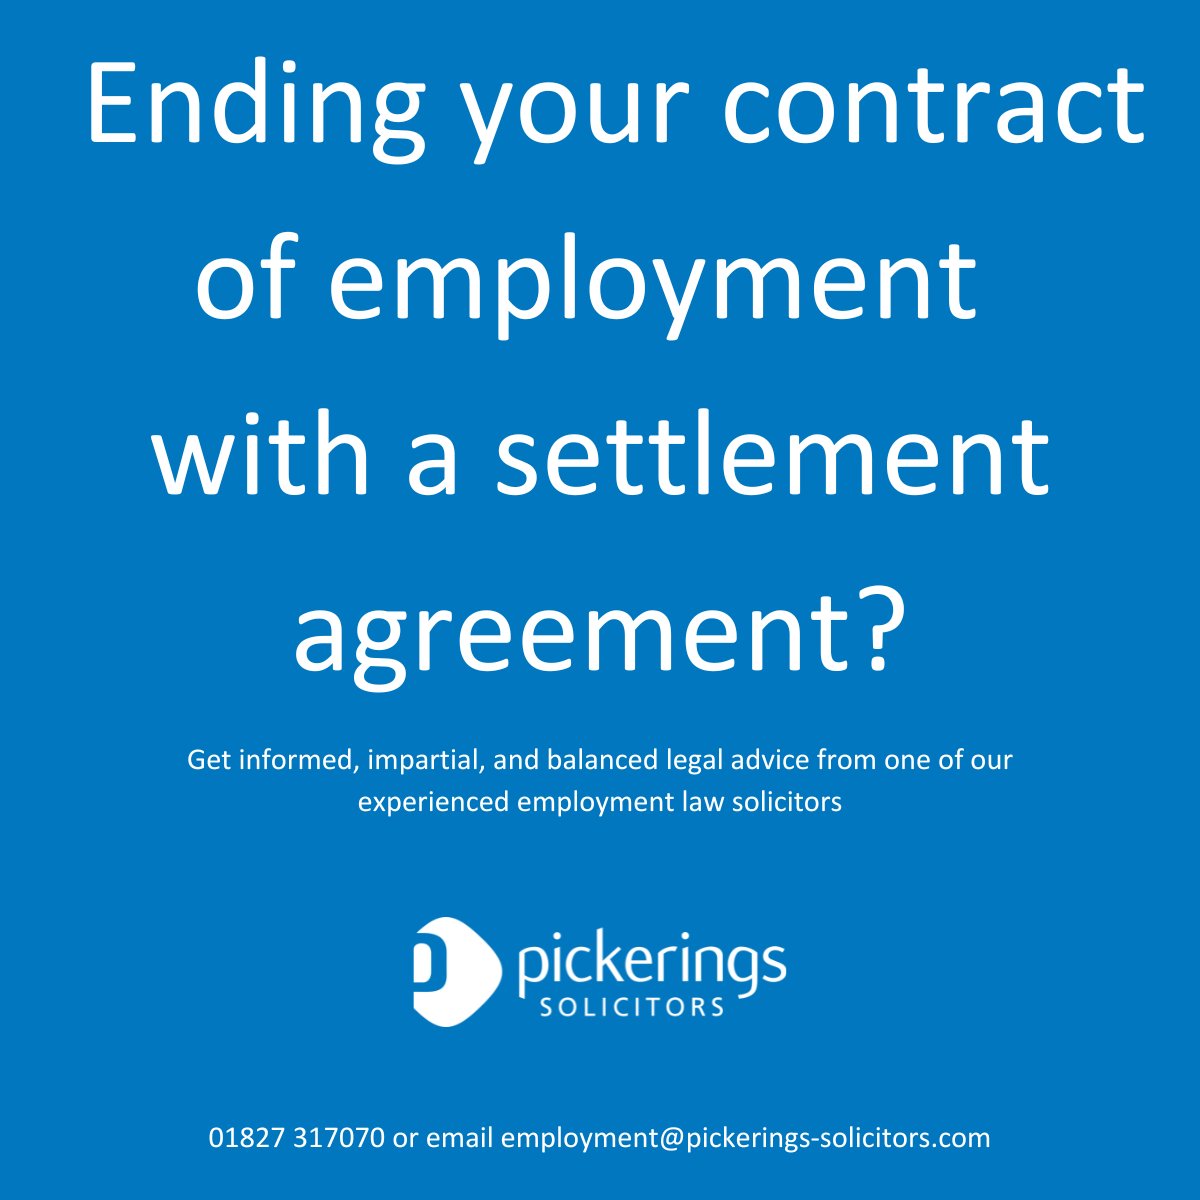 Don't sit worrying, call one of our specialist Employment Team, on 01827 317070 employment@pickerings-solicitors.com

Our team may be able to answer any niggling questions very easily.
#employmentlaw #askusanything #settlementservices #settlementagreement #employmentlawyer